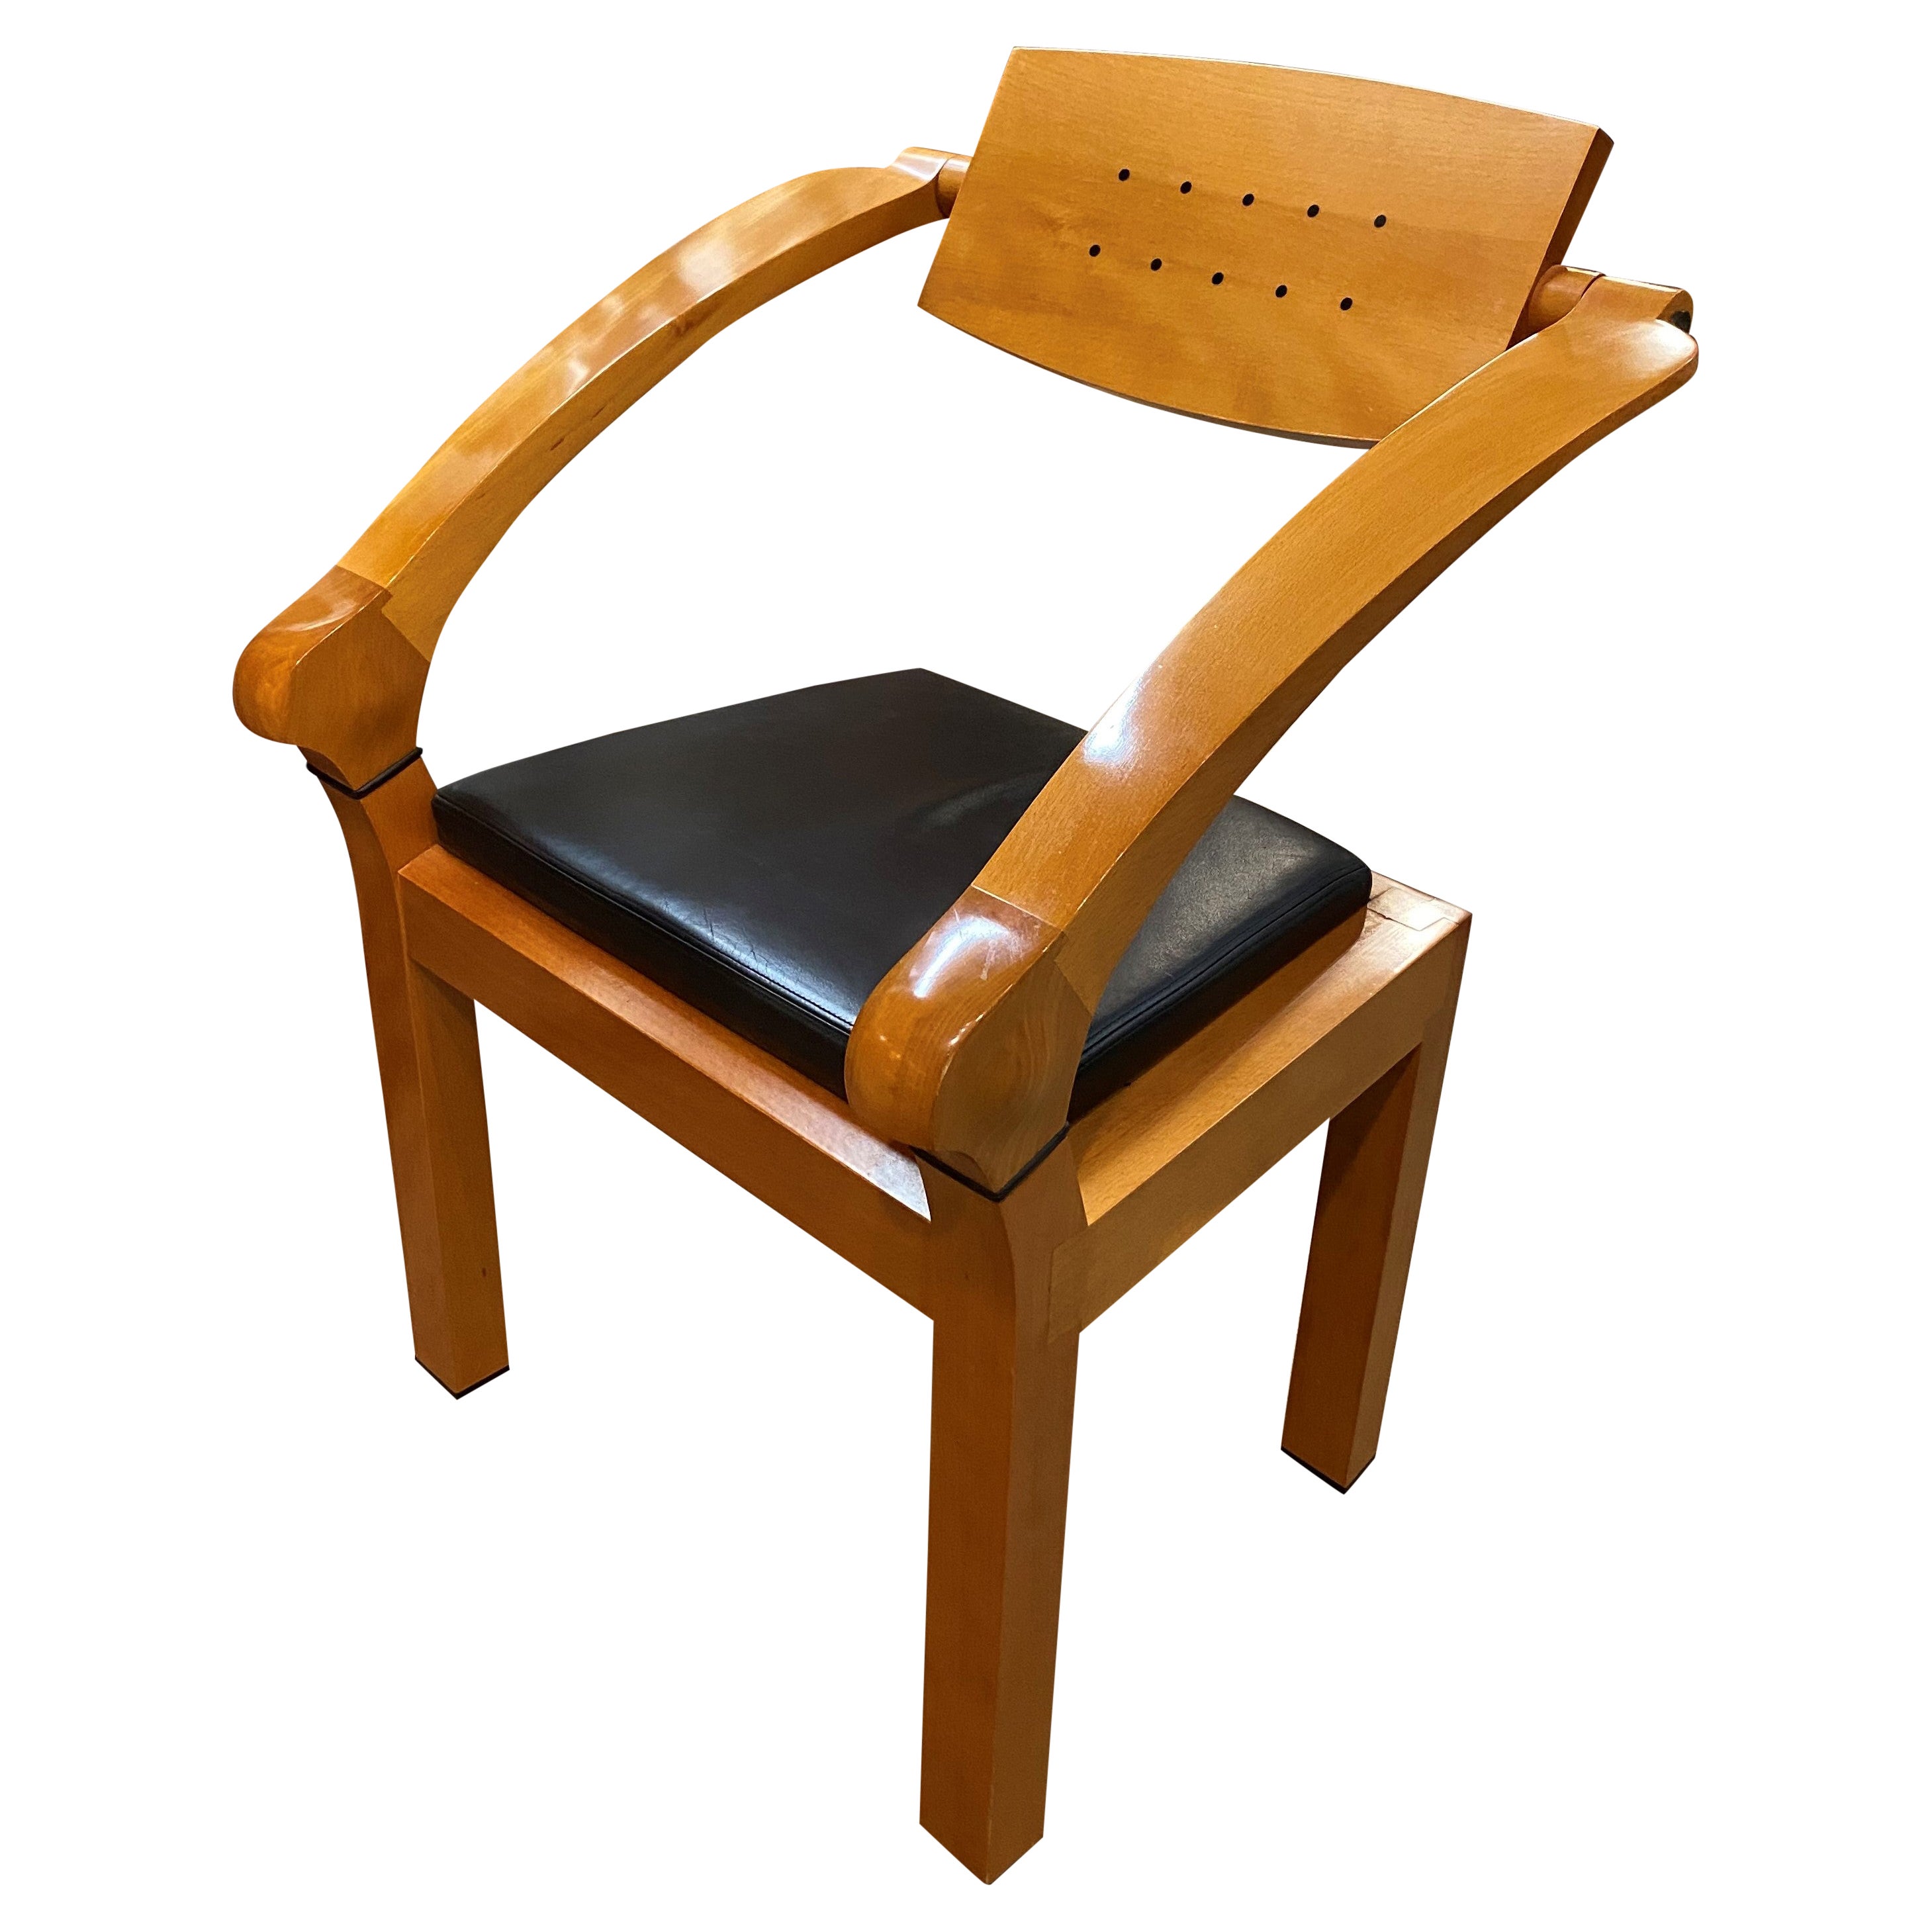 Late 20th c Beech & Ebony Spring Office Chair by Massimo Scolari for Giorgetti